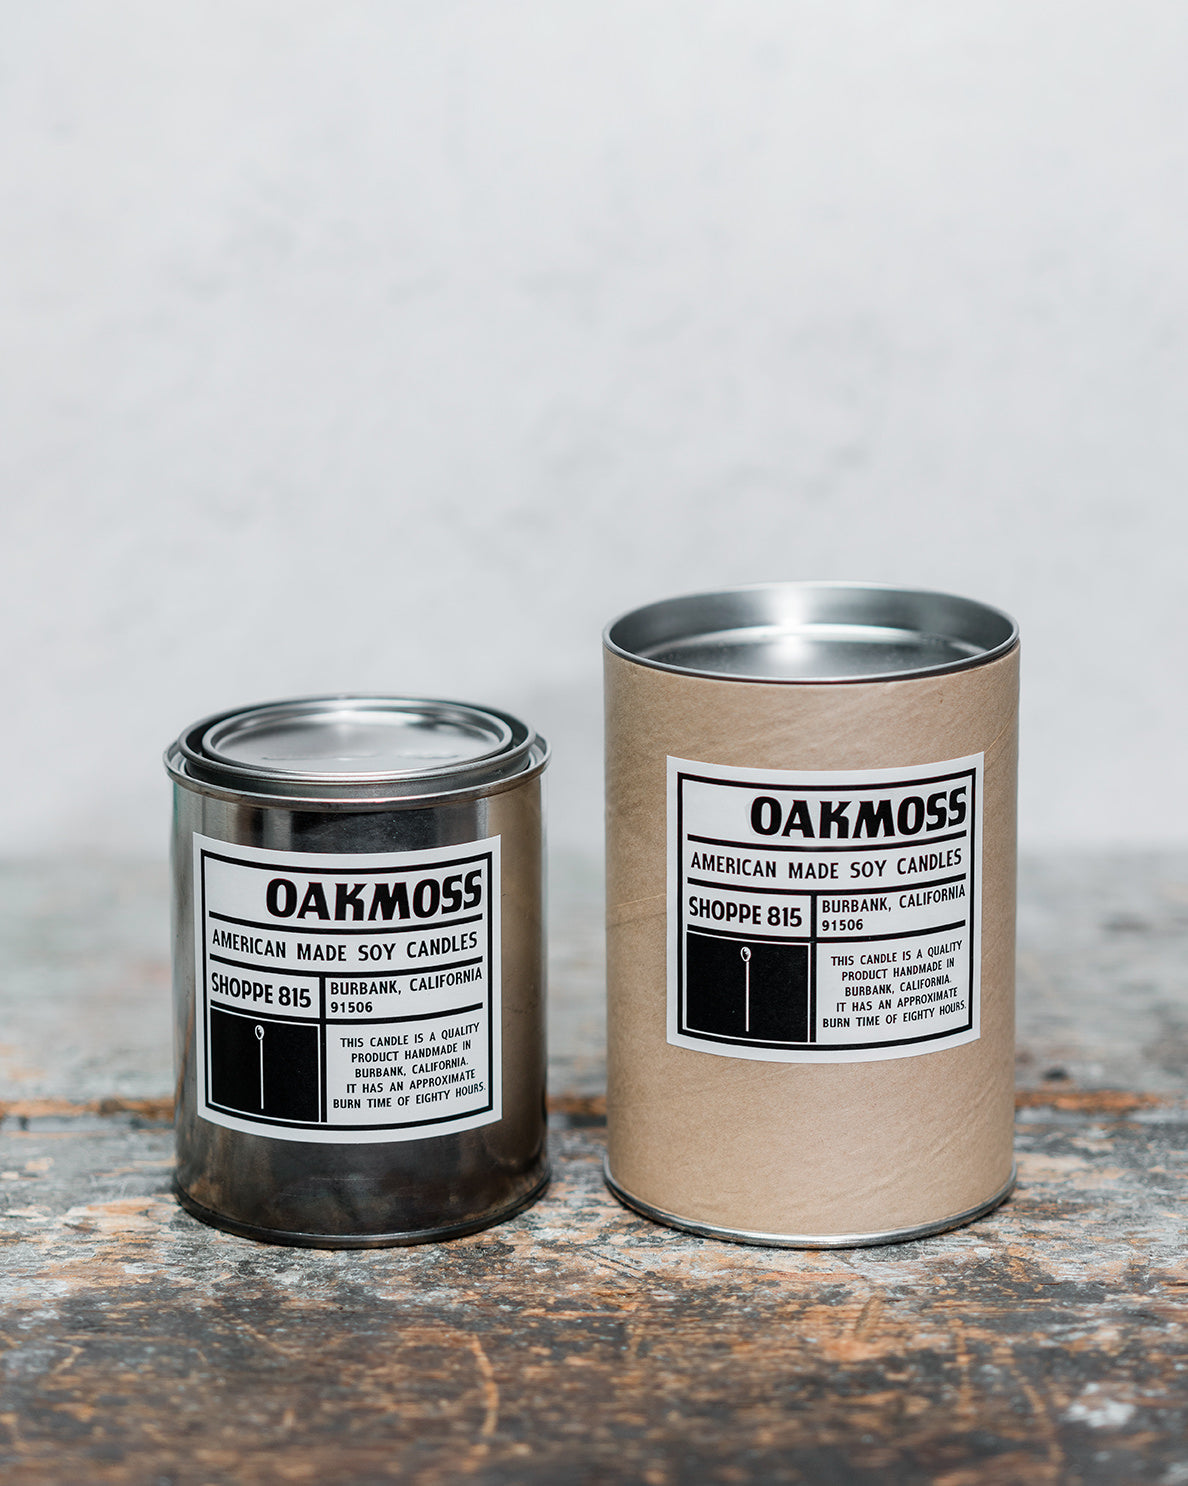 Oakmoss gender neutral tin candle on wooden shelf with packaging